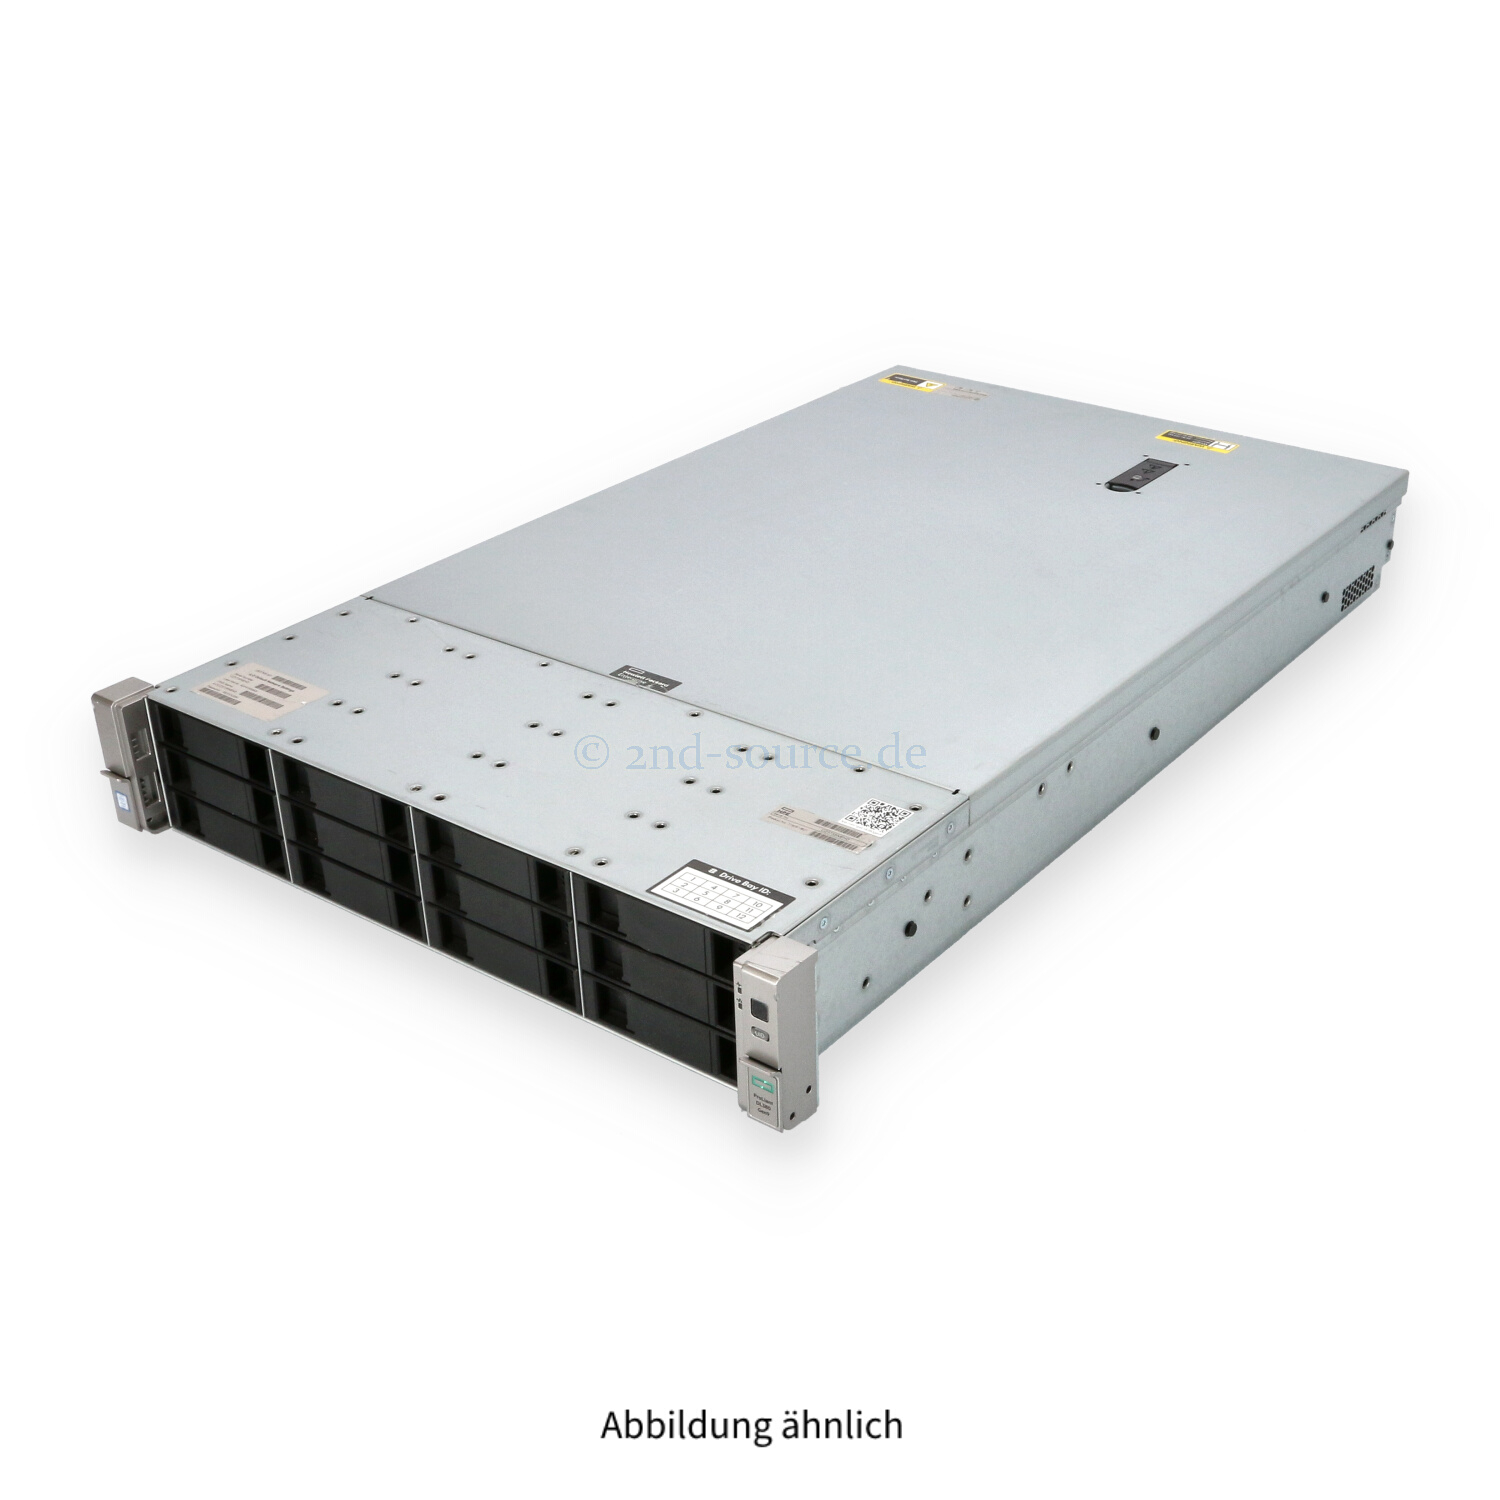 HPE DL380 G9 12xLFF 2xSFF P440ar/2GB Expander CTO Chassis 719061-B21